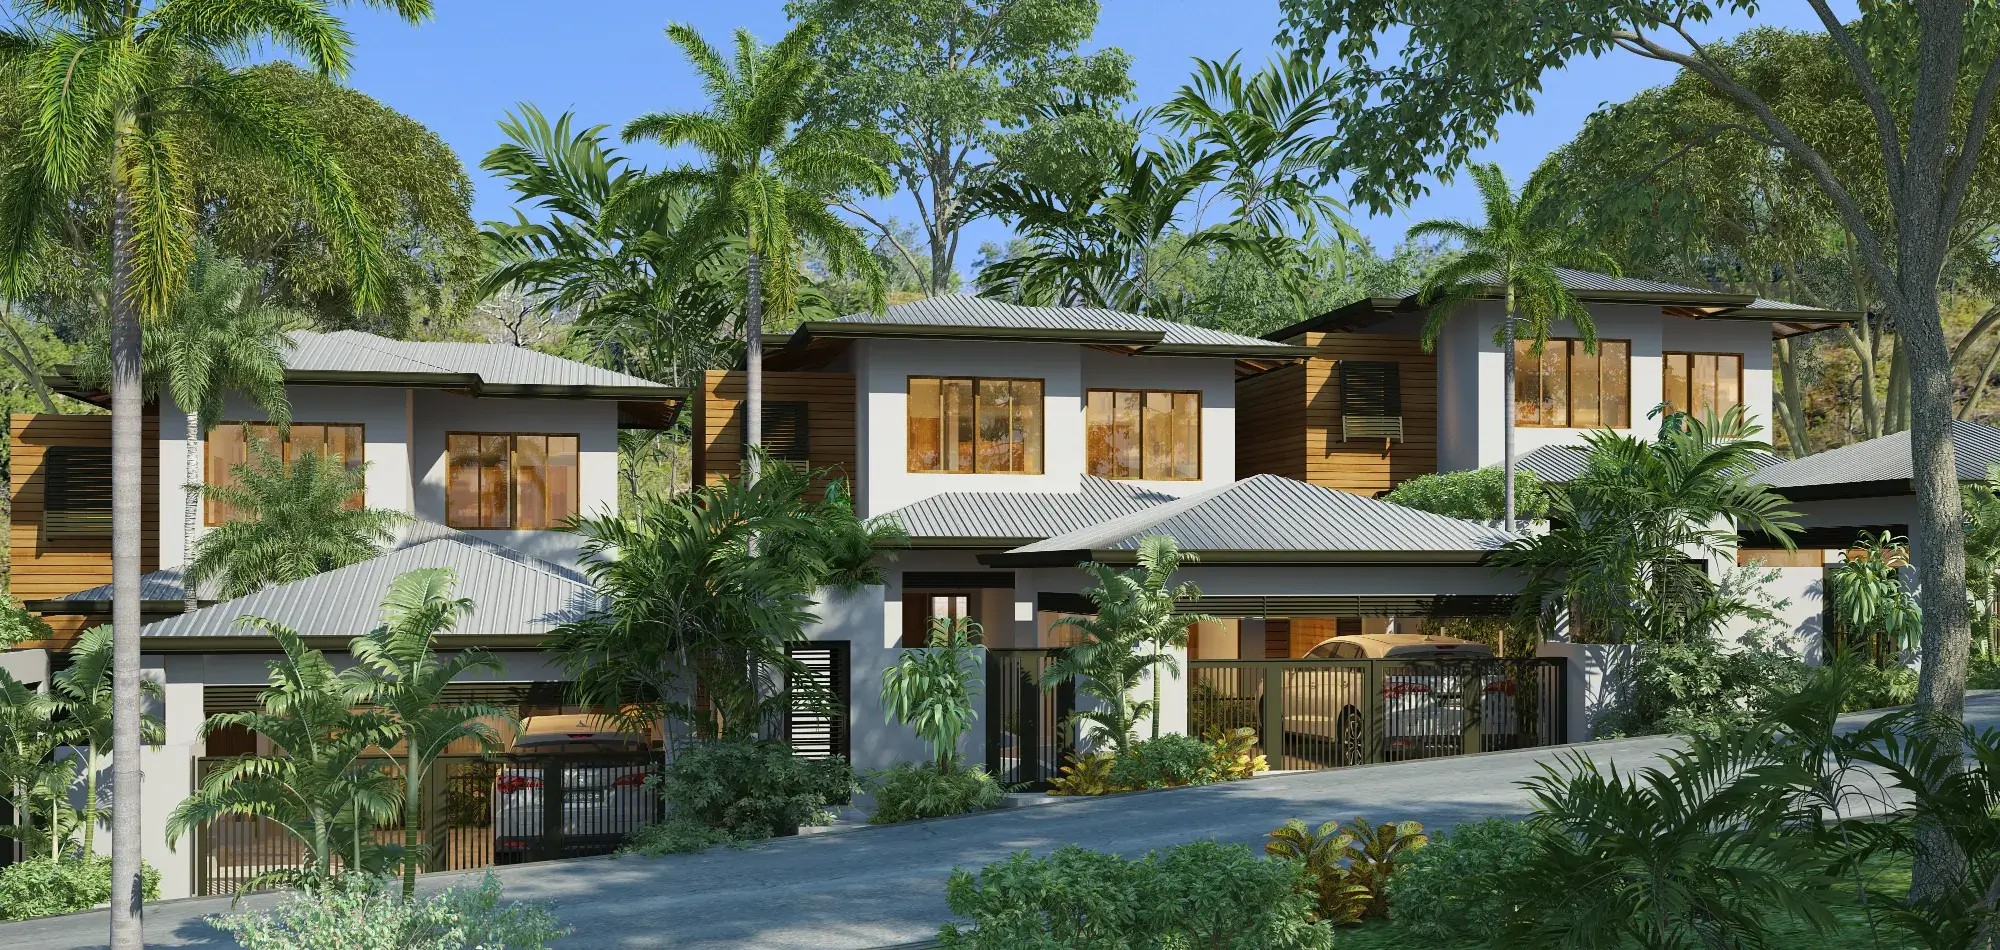 Available 5-Bedroom Homes at Tamarindo Park